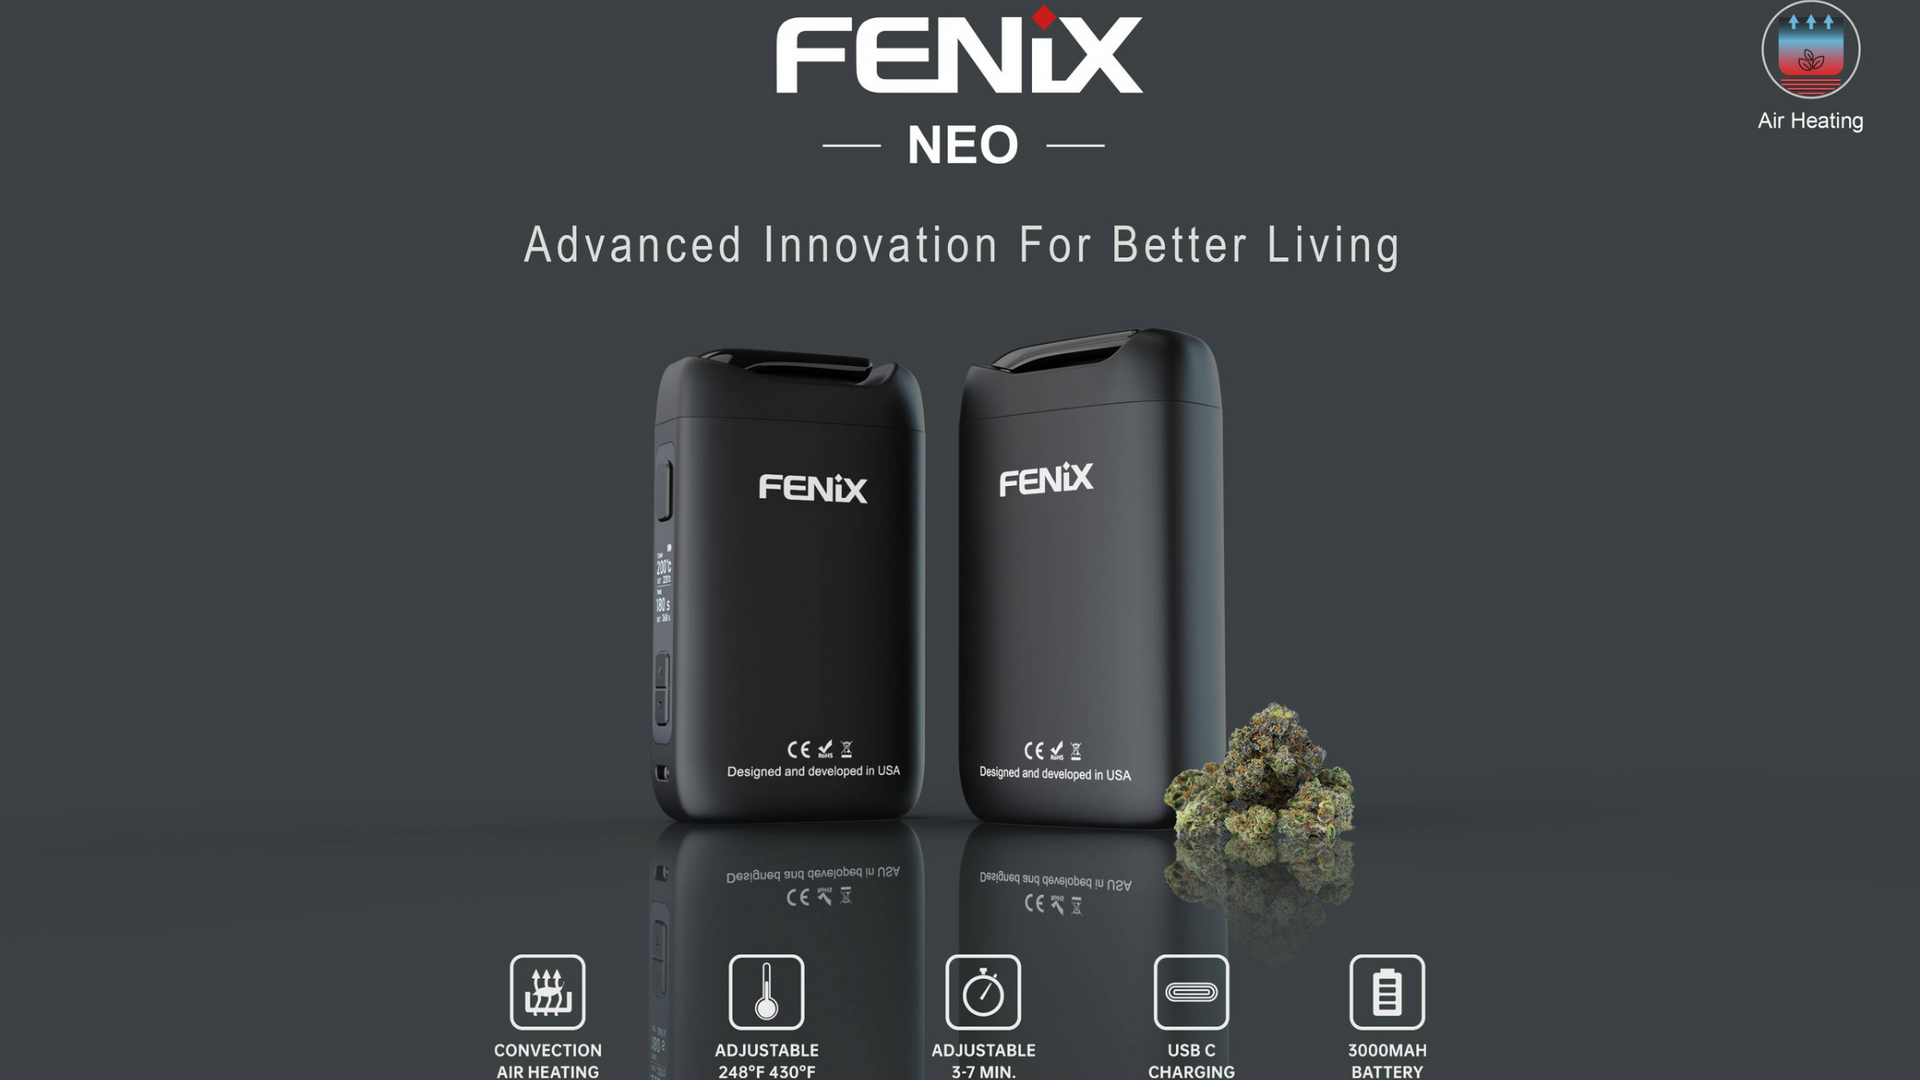 Fenix NEO Full Convection Vaporizer - A Compact Powerhouse for Superior Vaping